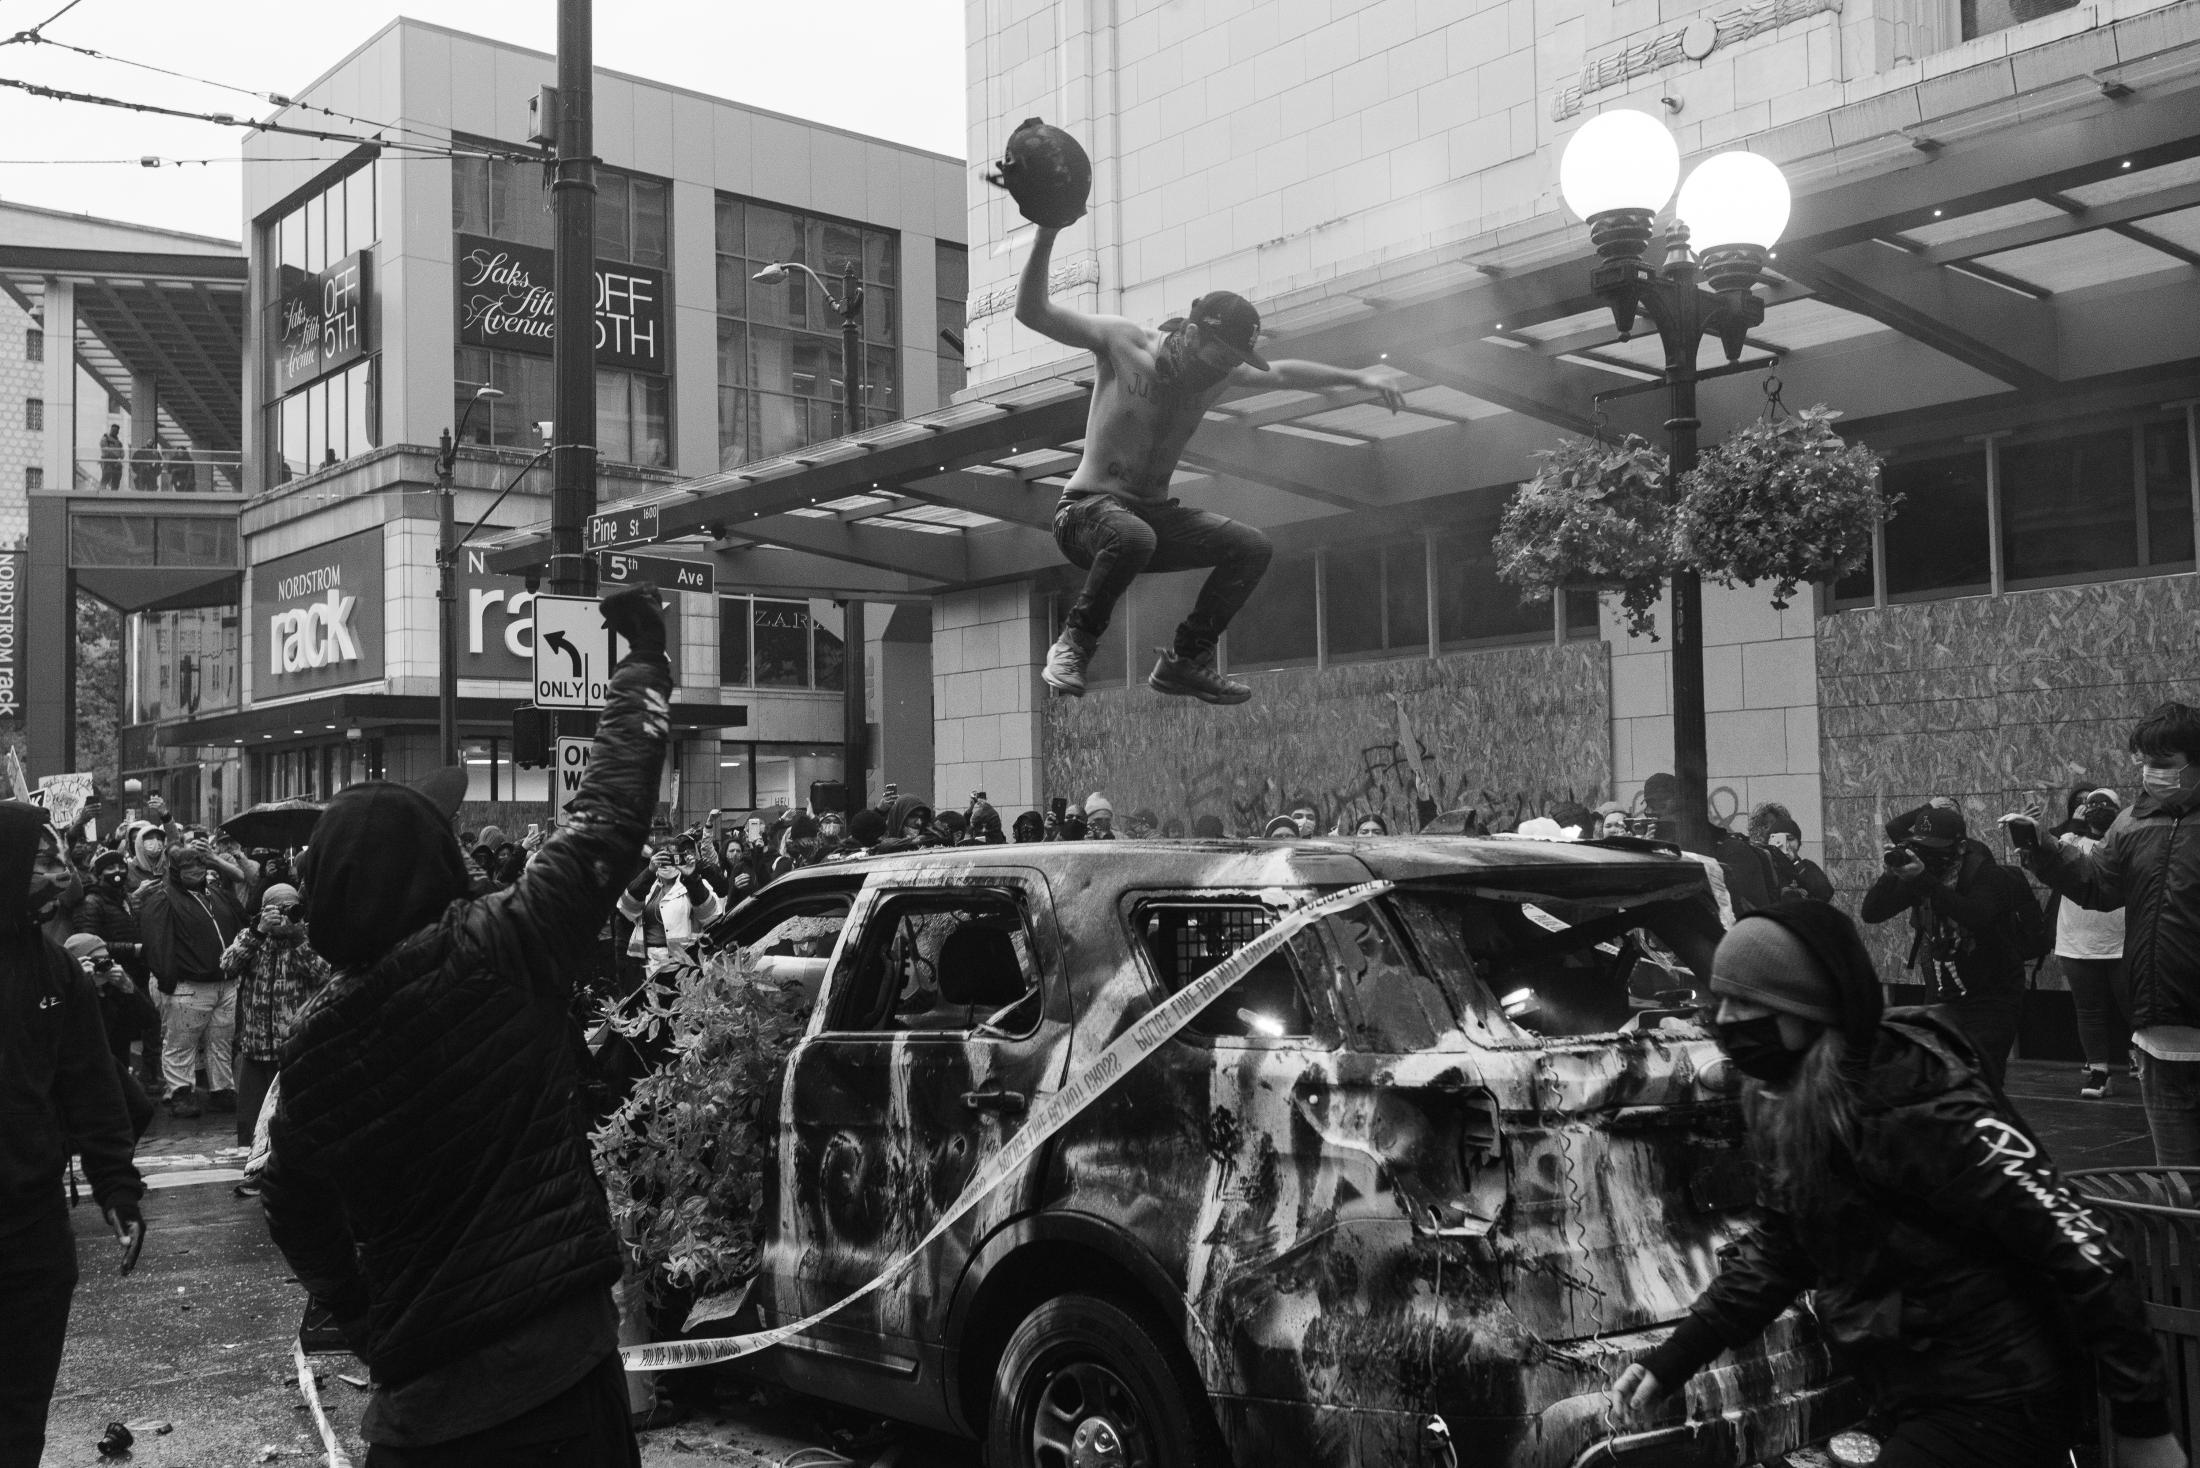 George Floyd Protests in Seattle, Washington - The second day of protests in Seattle, Washington turned...